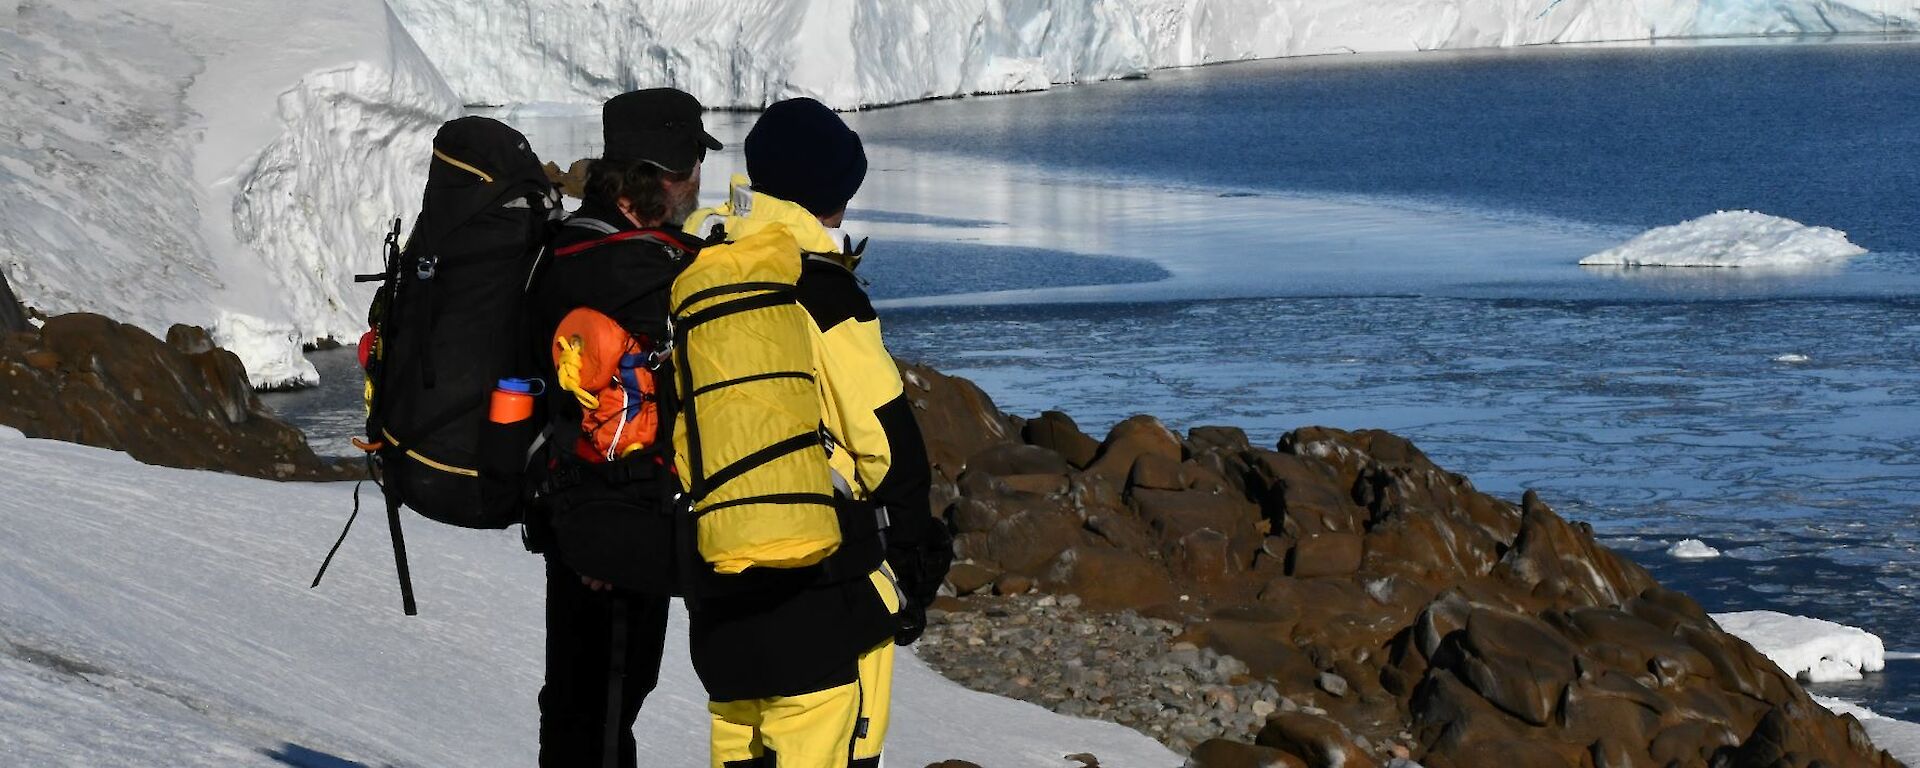 Two people stand on a snow covered hill, with the face of a large glacier stretching away in the background. The person on the right is wearing yellow winter pants and jacket, the person on the left has black clothing, and a large backpack. There are several large pieces of ice floating in the water in front of the crumbling glacier face.